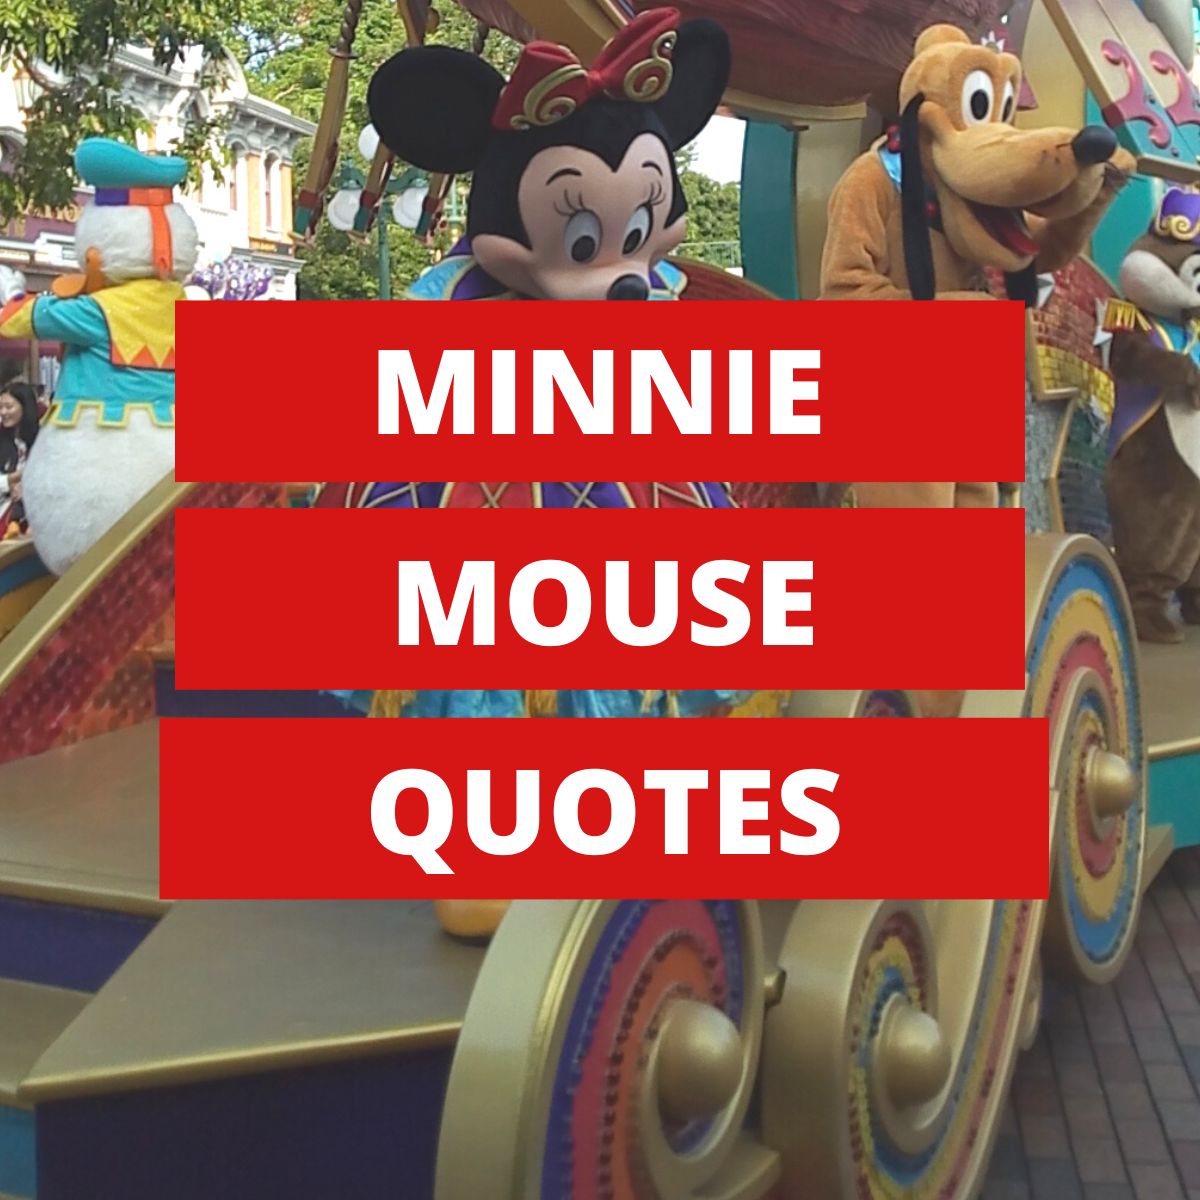 minnie mouse quotes featured image